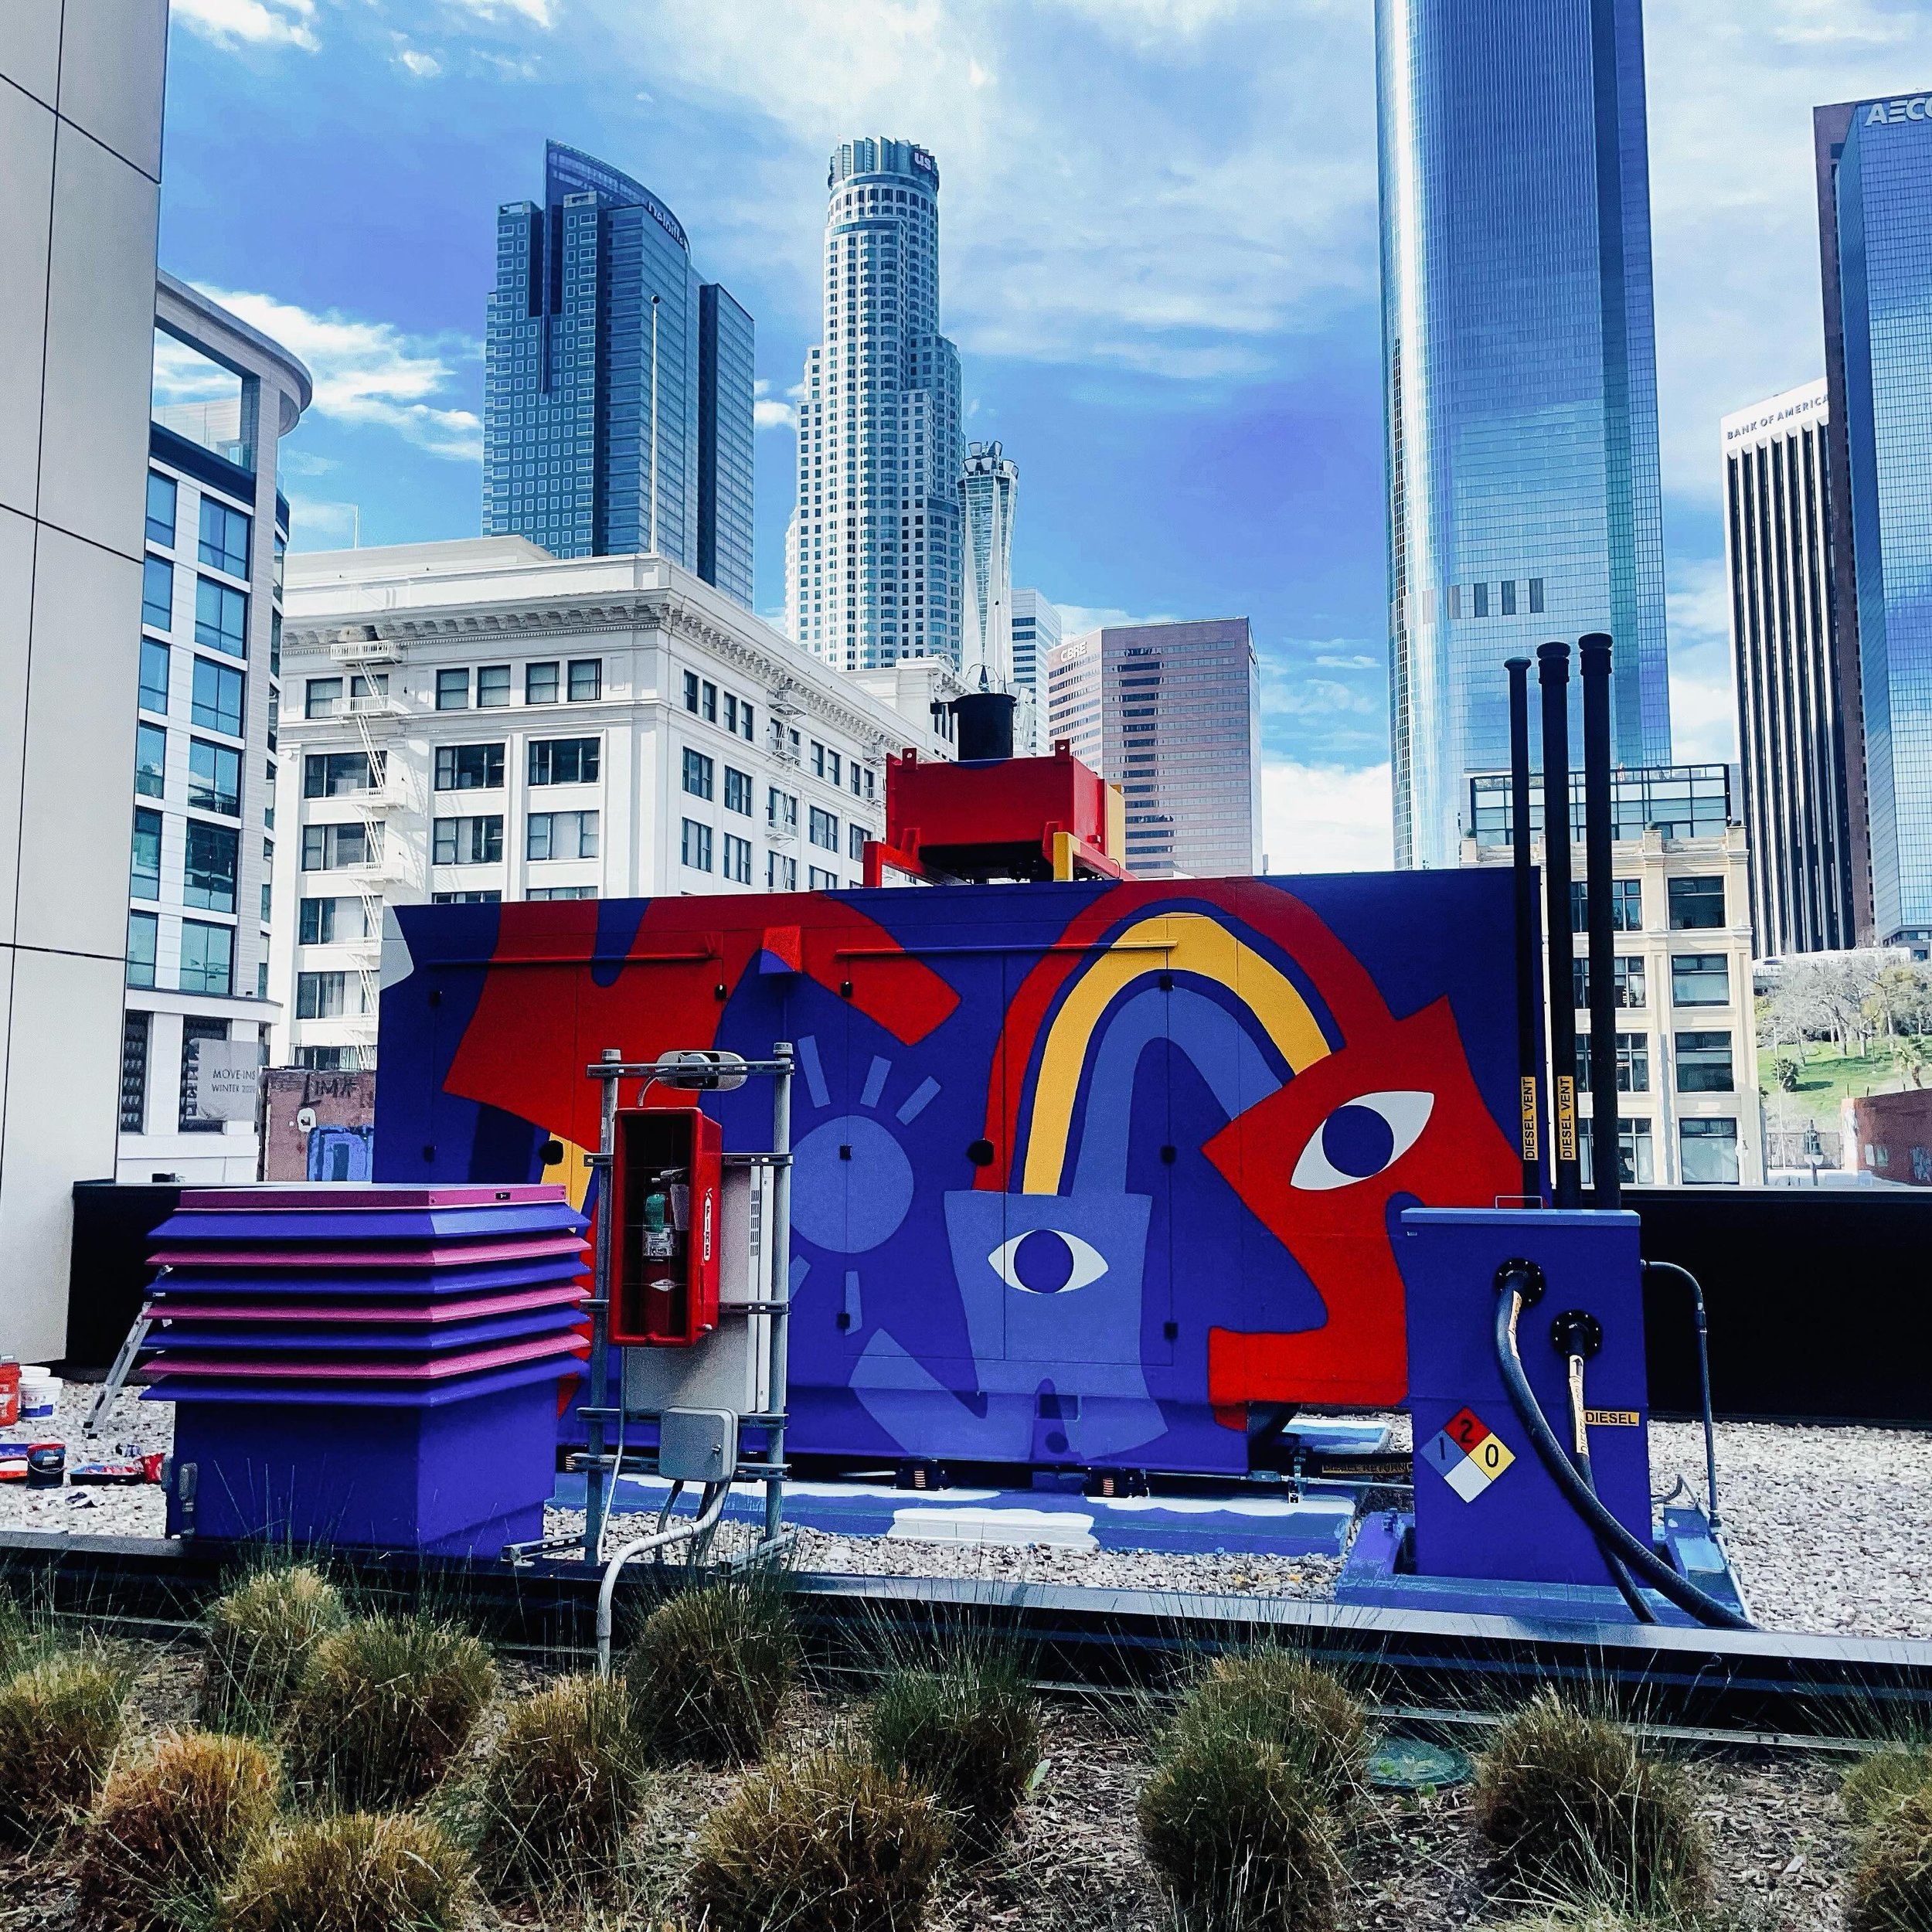 Rly cool pic of the generator for @citizenm by @jessincase aka hot daddy conkwright 📸❤️

#art #mural #losangeles #laart #lamural #ily  #fyp